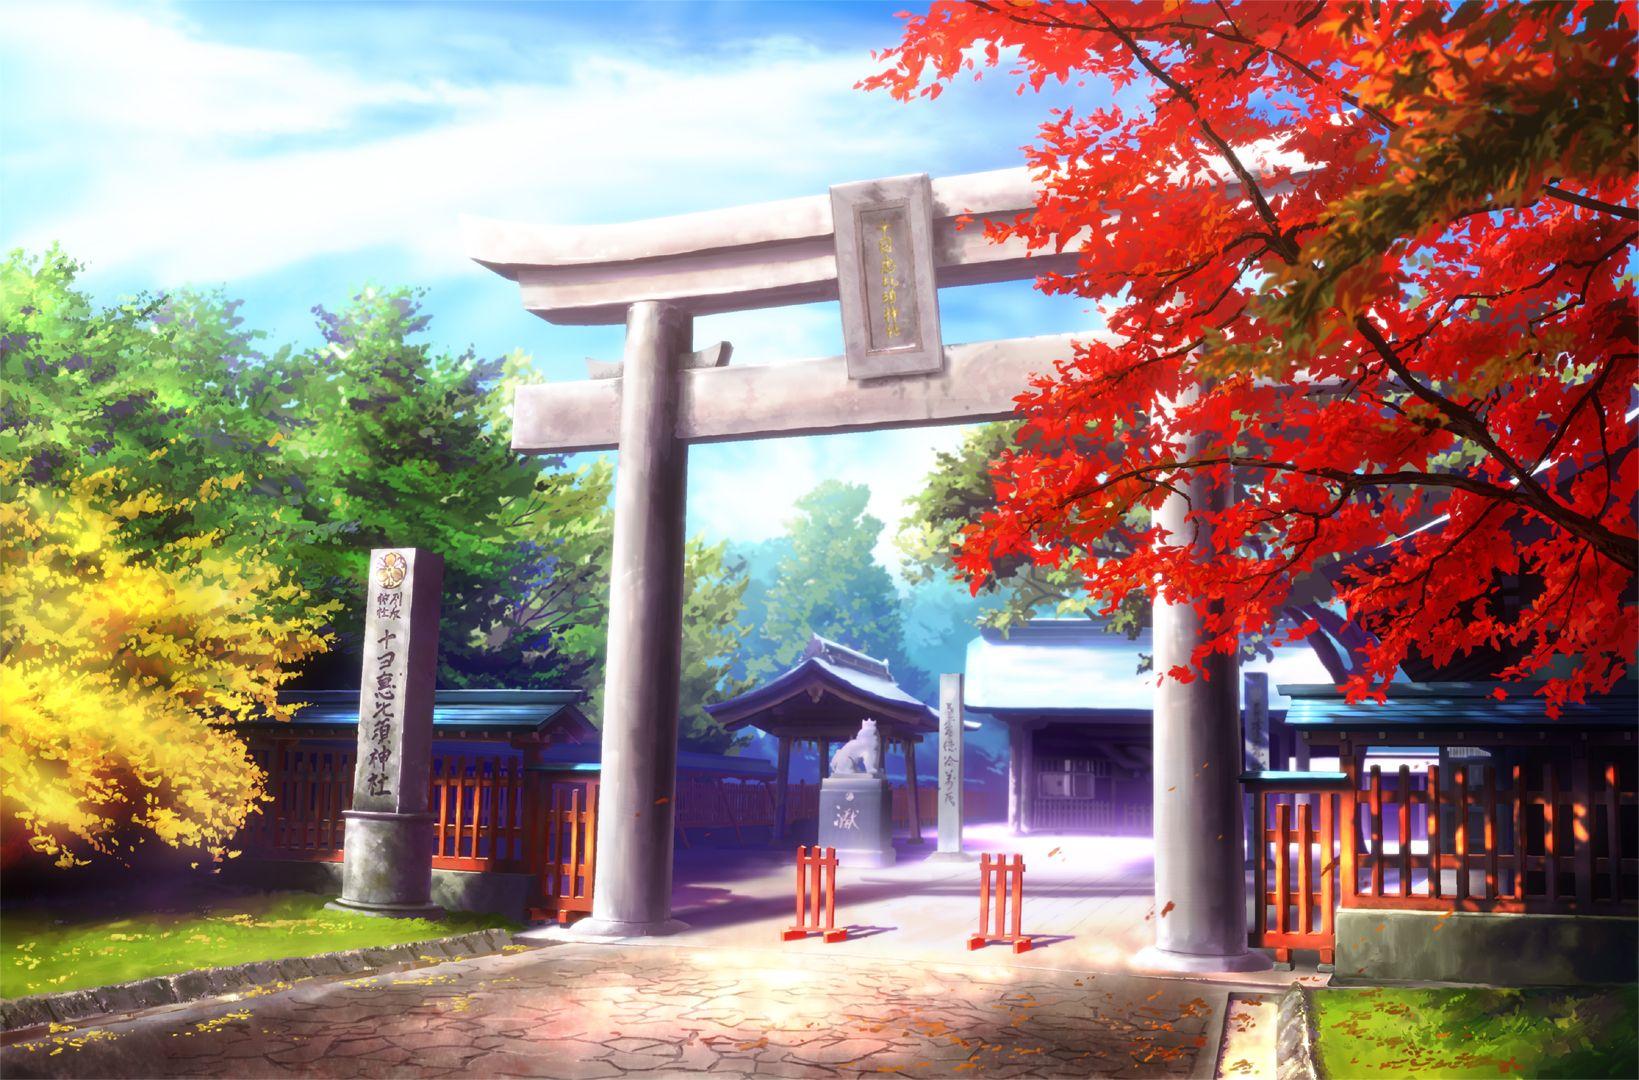 Japanese Anime Scenery Wallpapers - Top Free Japanese Anime Scenery